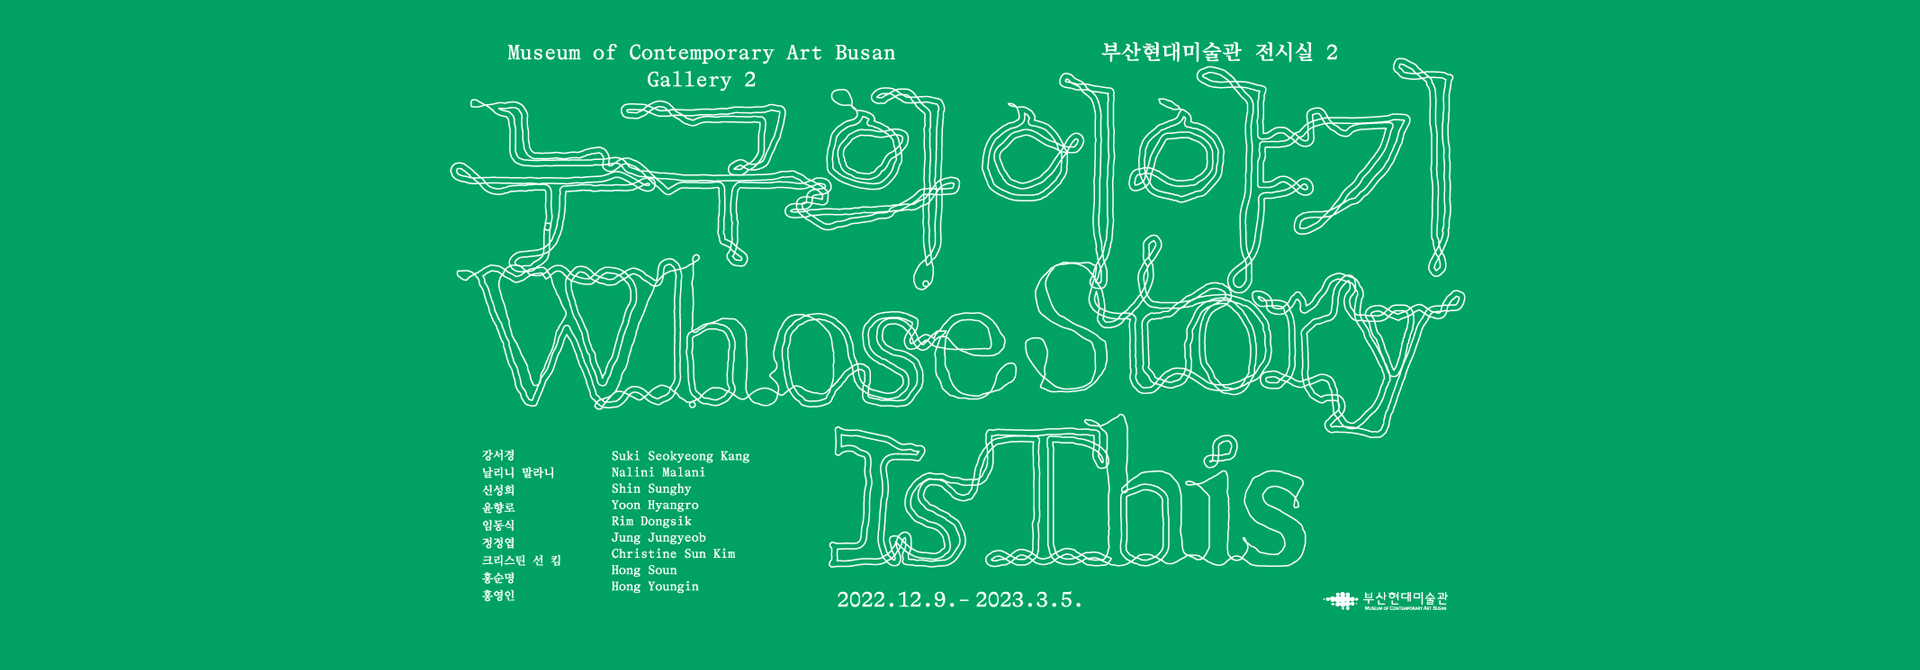 Museum of Contemporary Art Busan
부산현대미술관 전시실2
누구의 이야기
Whose Story
Is this
2022.12.9.-2023.3.5.

누구의 이야기